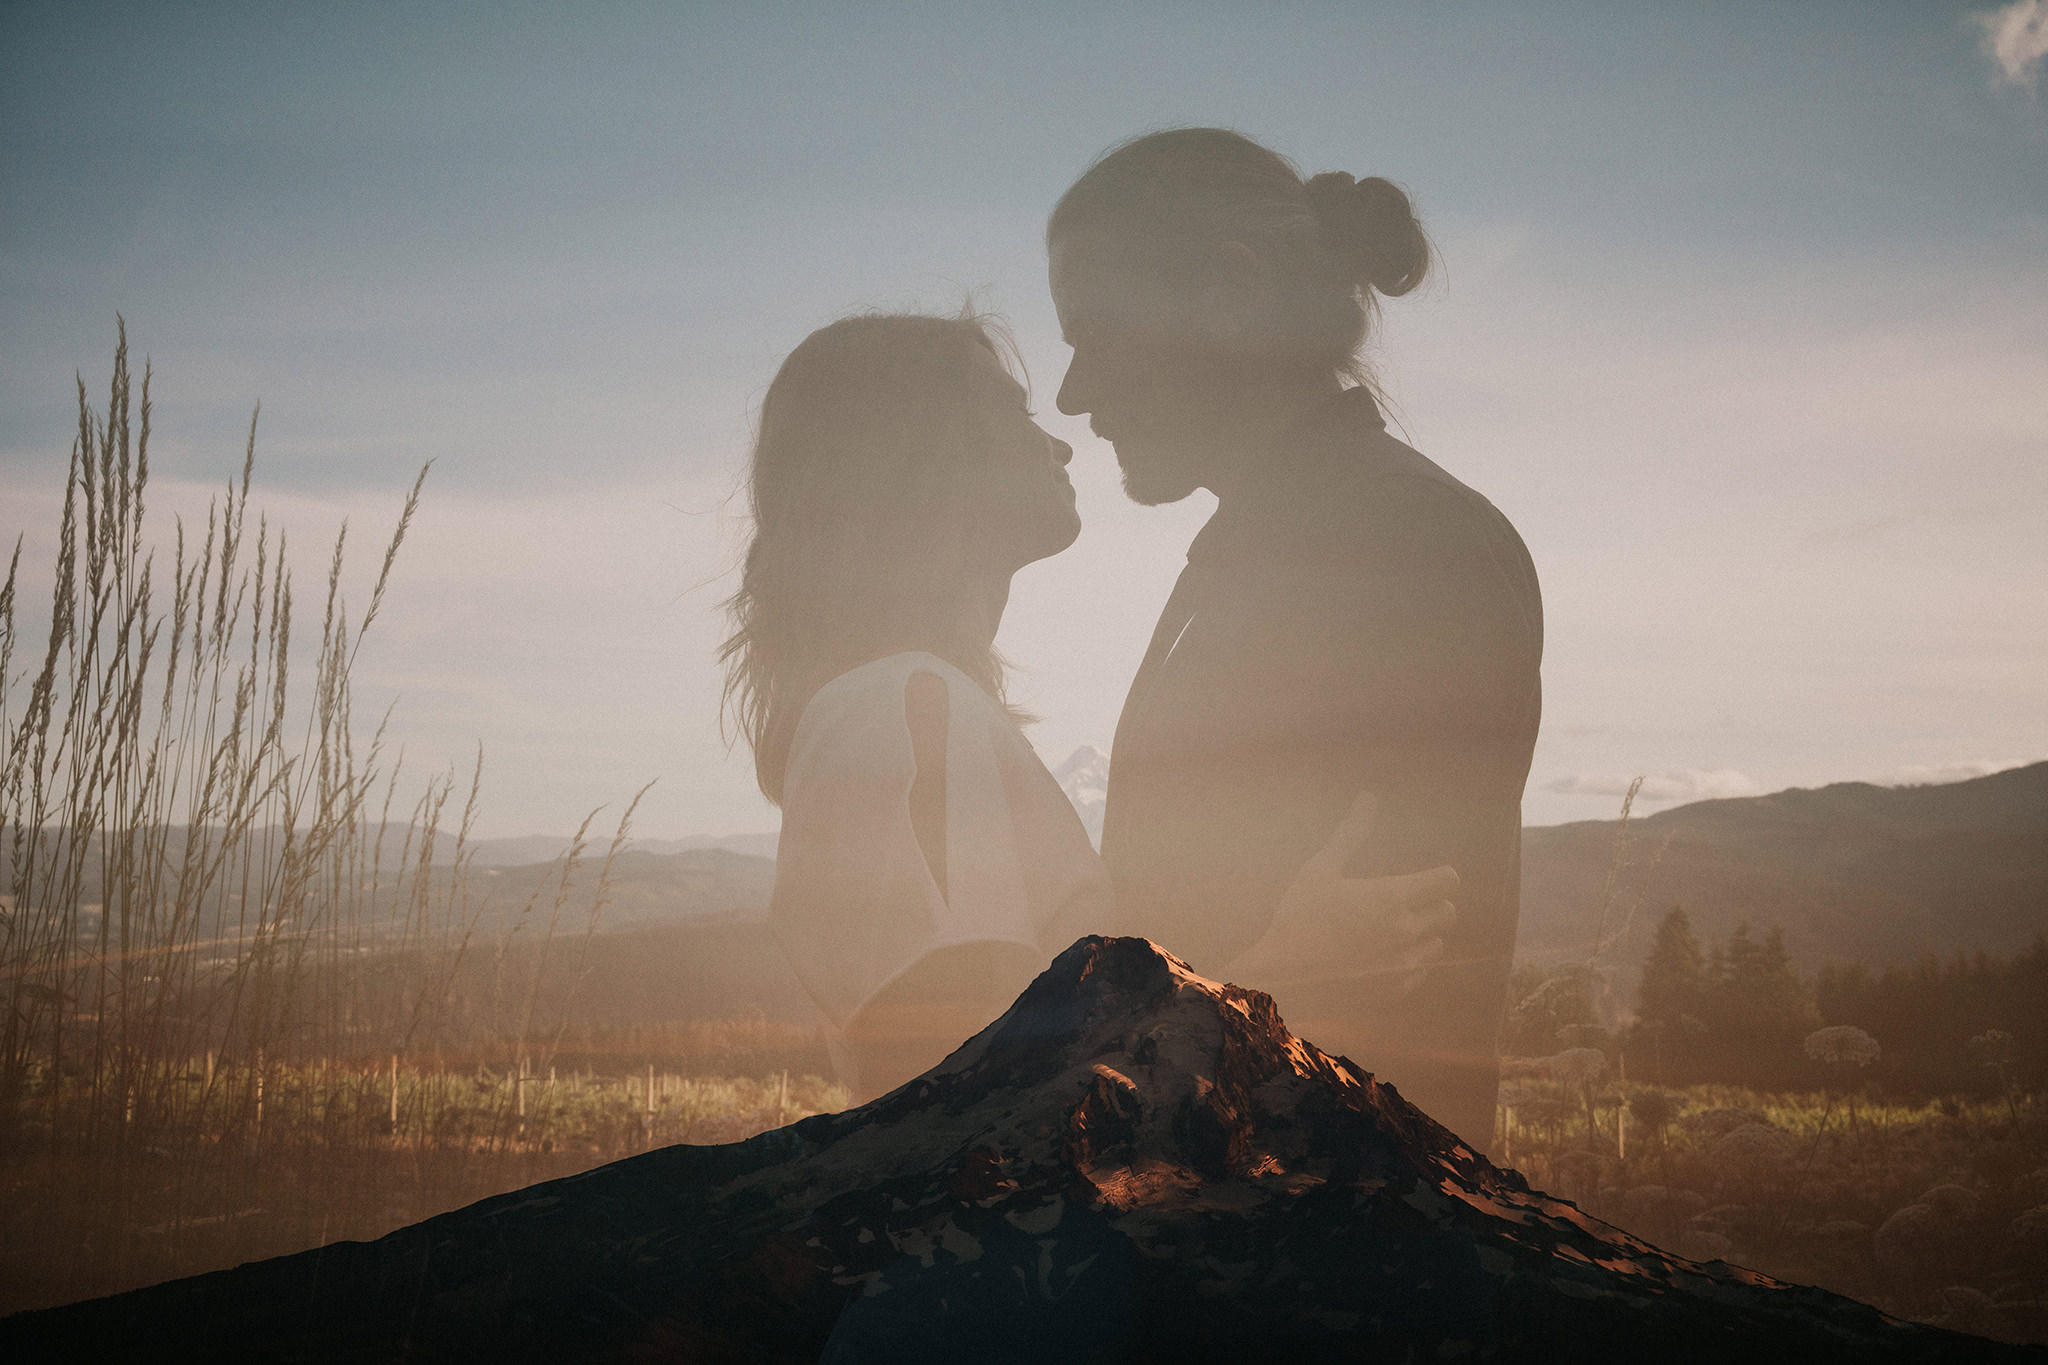 Artistic wedding photo with a double exposure of Mount Hood and the bride and groom